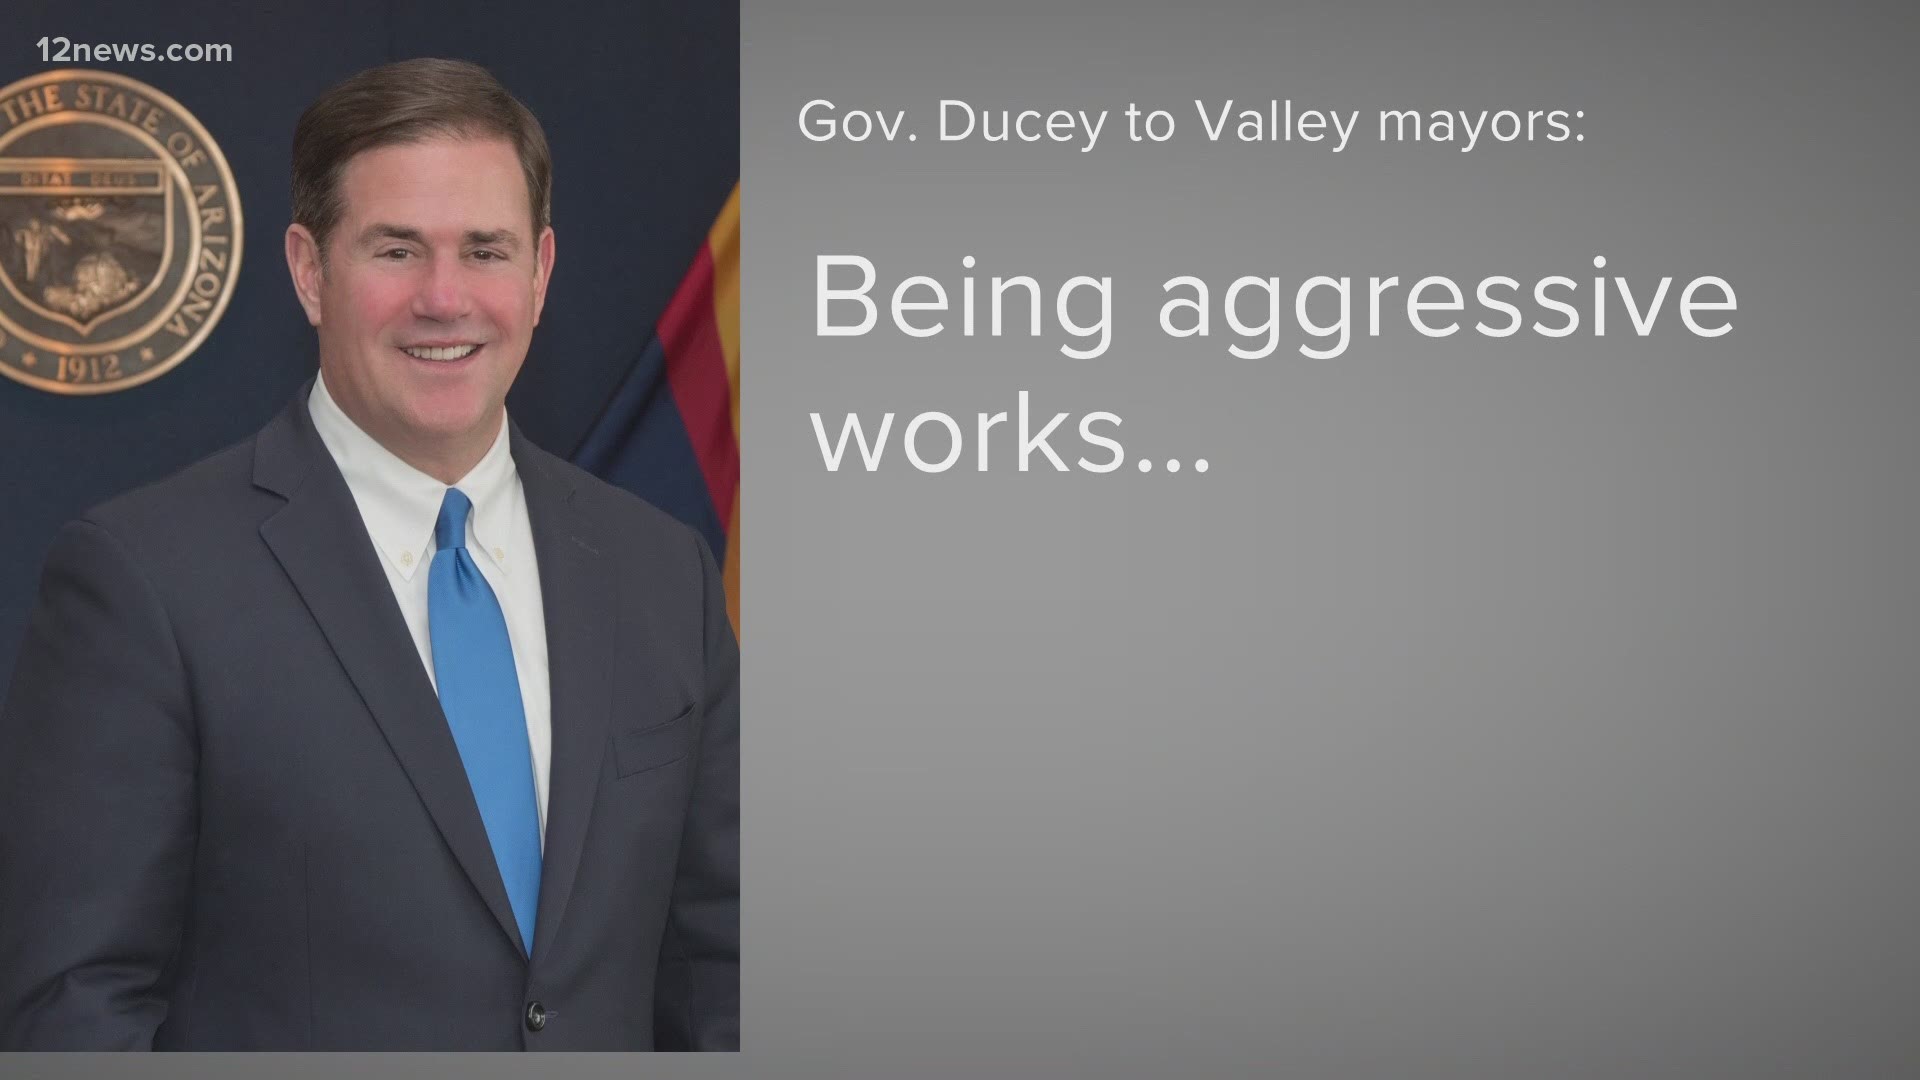 Gov. Ducey is warning Valley mayors that riots might be coming to their towns. His message to the mayors was to be aggressive and protect cities.